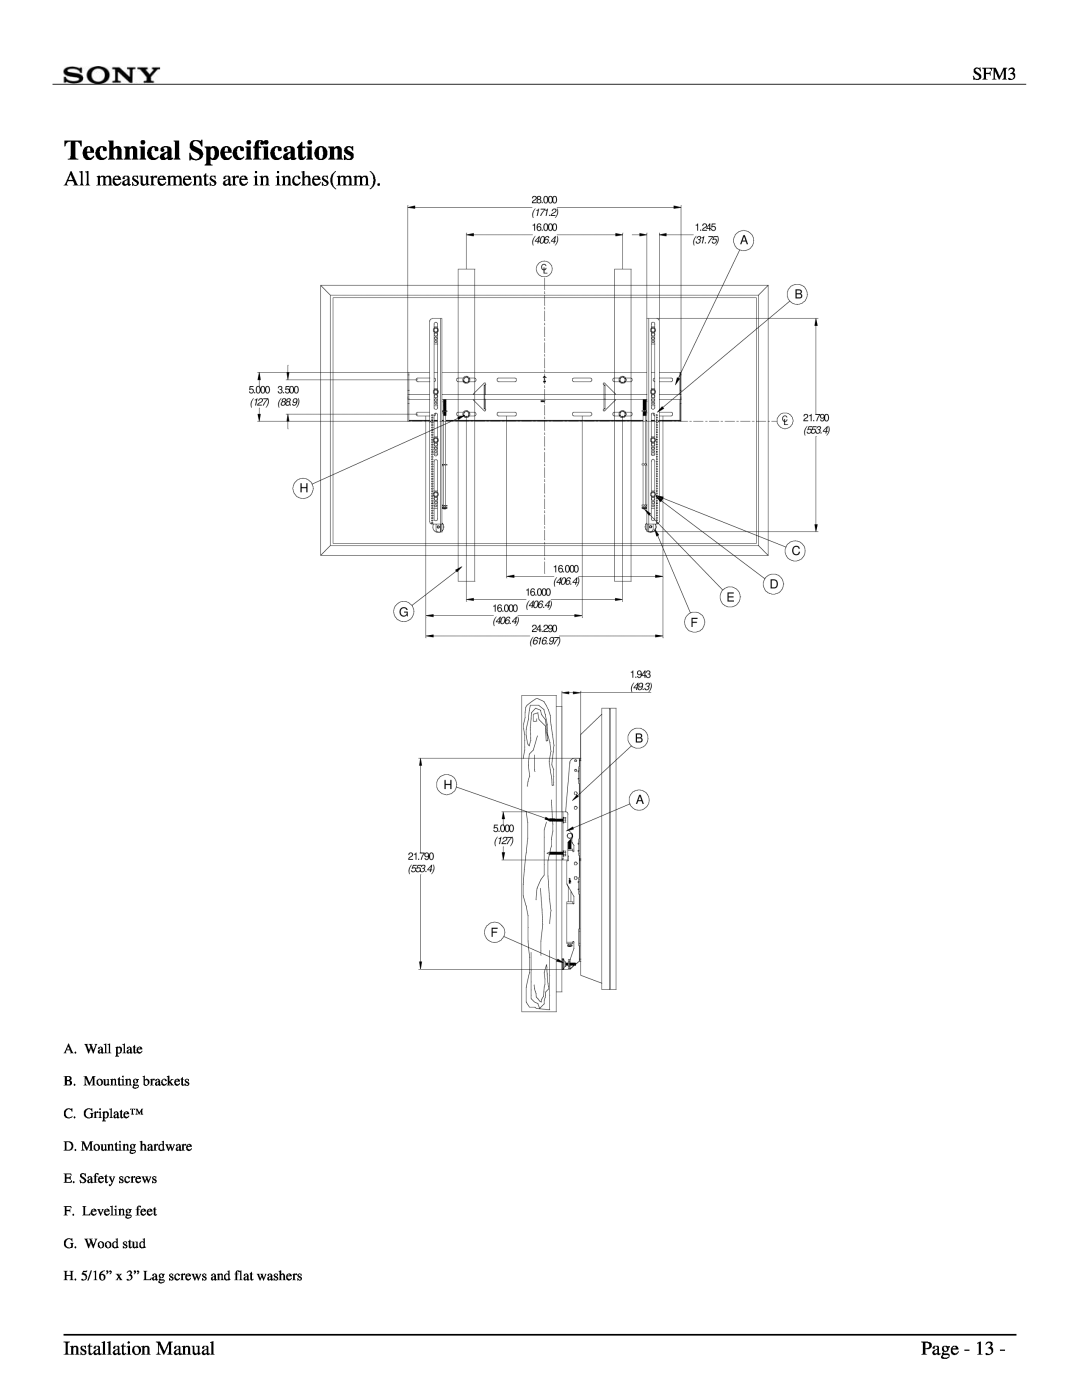 Sony SFM3 Technical Specifications, Installation Manual, Page, E. Safety screws F. Leveling feet G. Wood stud 